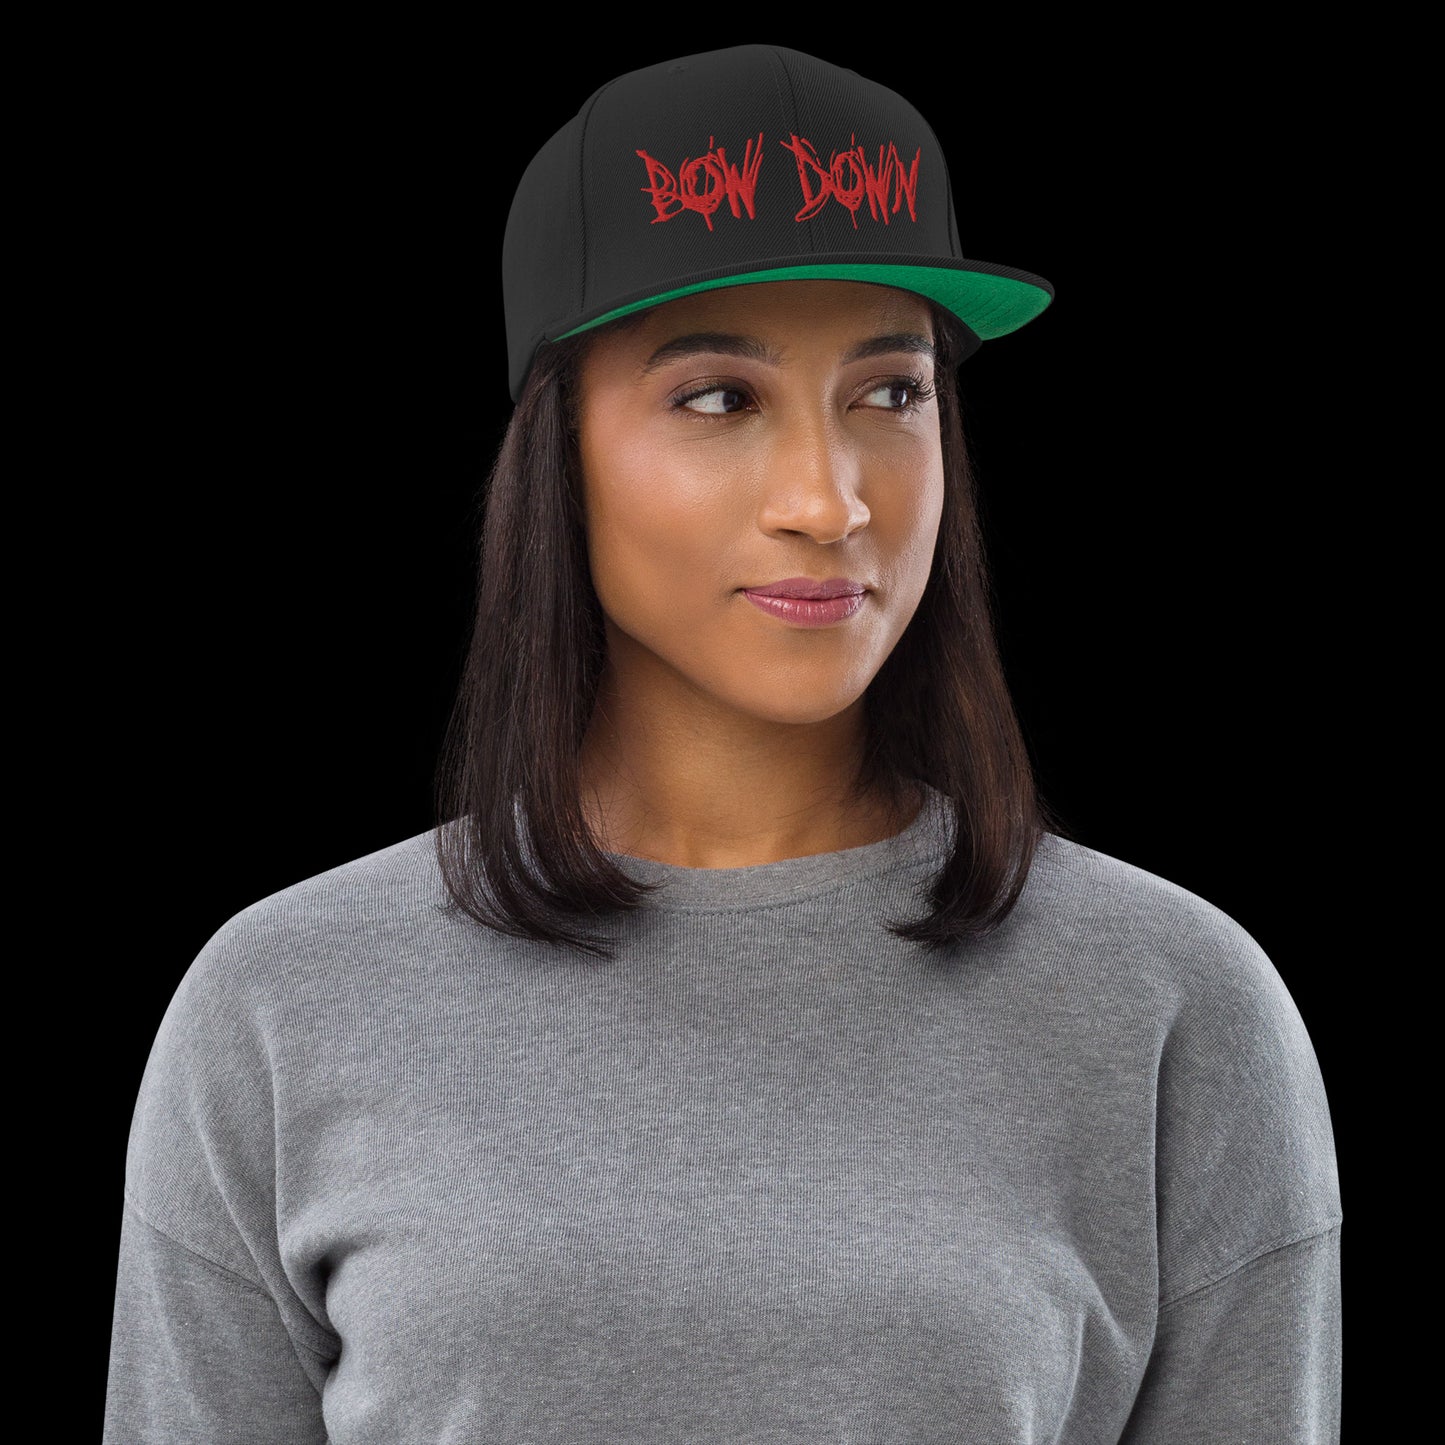 Bow Down Red Logo Snapback Hat